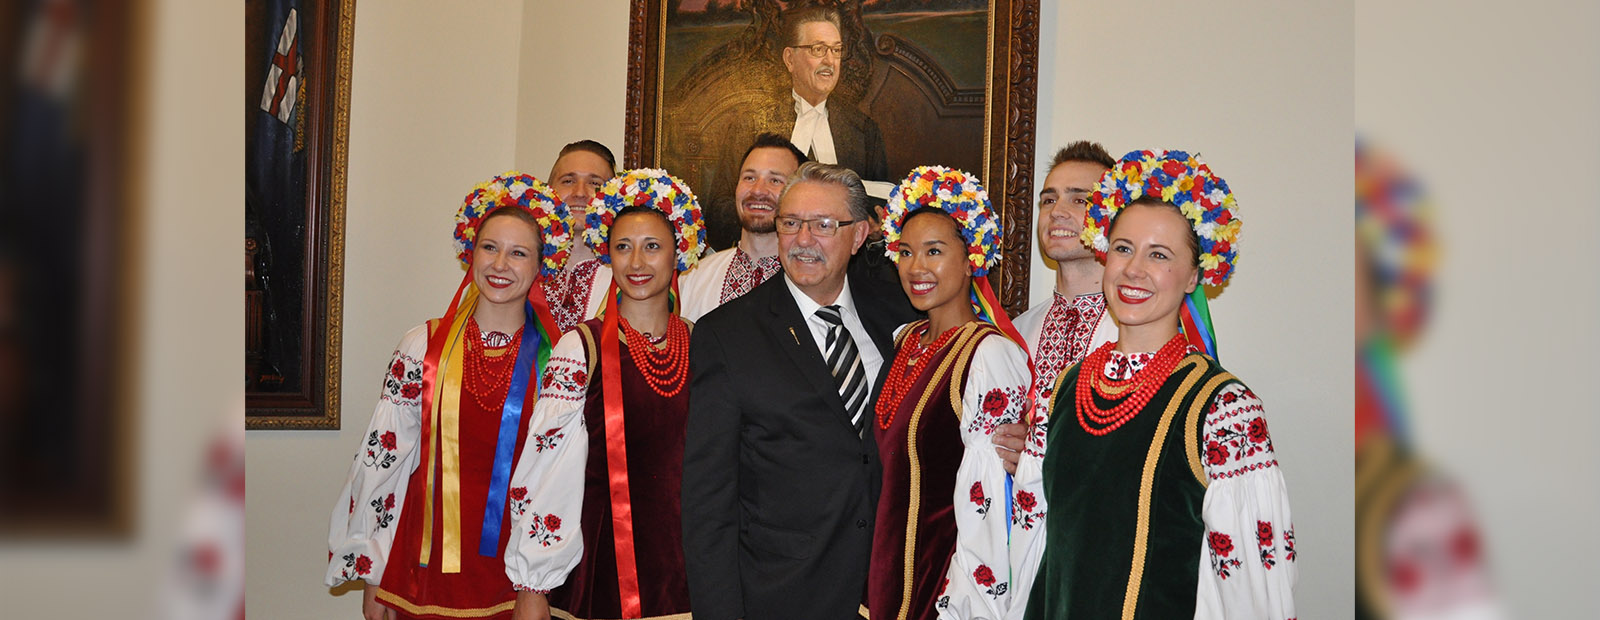 Gene Zwozdesksy stands in front of his portrait flanked by Shumka dancers dressed in brightly coloured dresses and head pieces